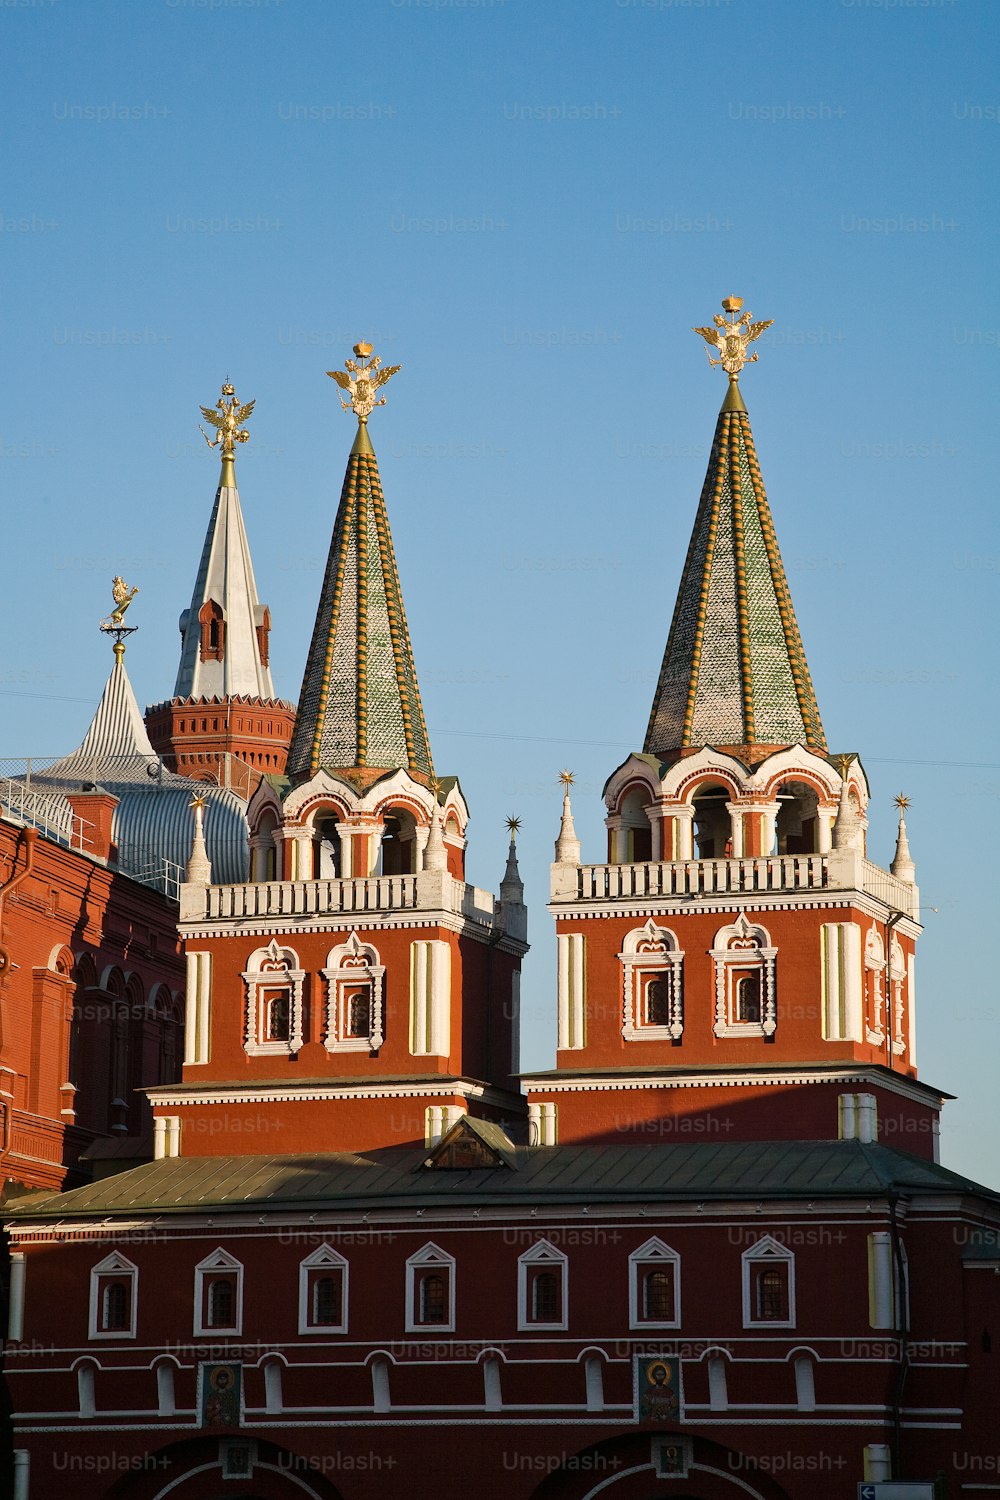 a large building with two towers and a clock